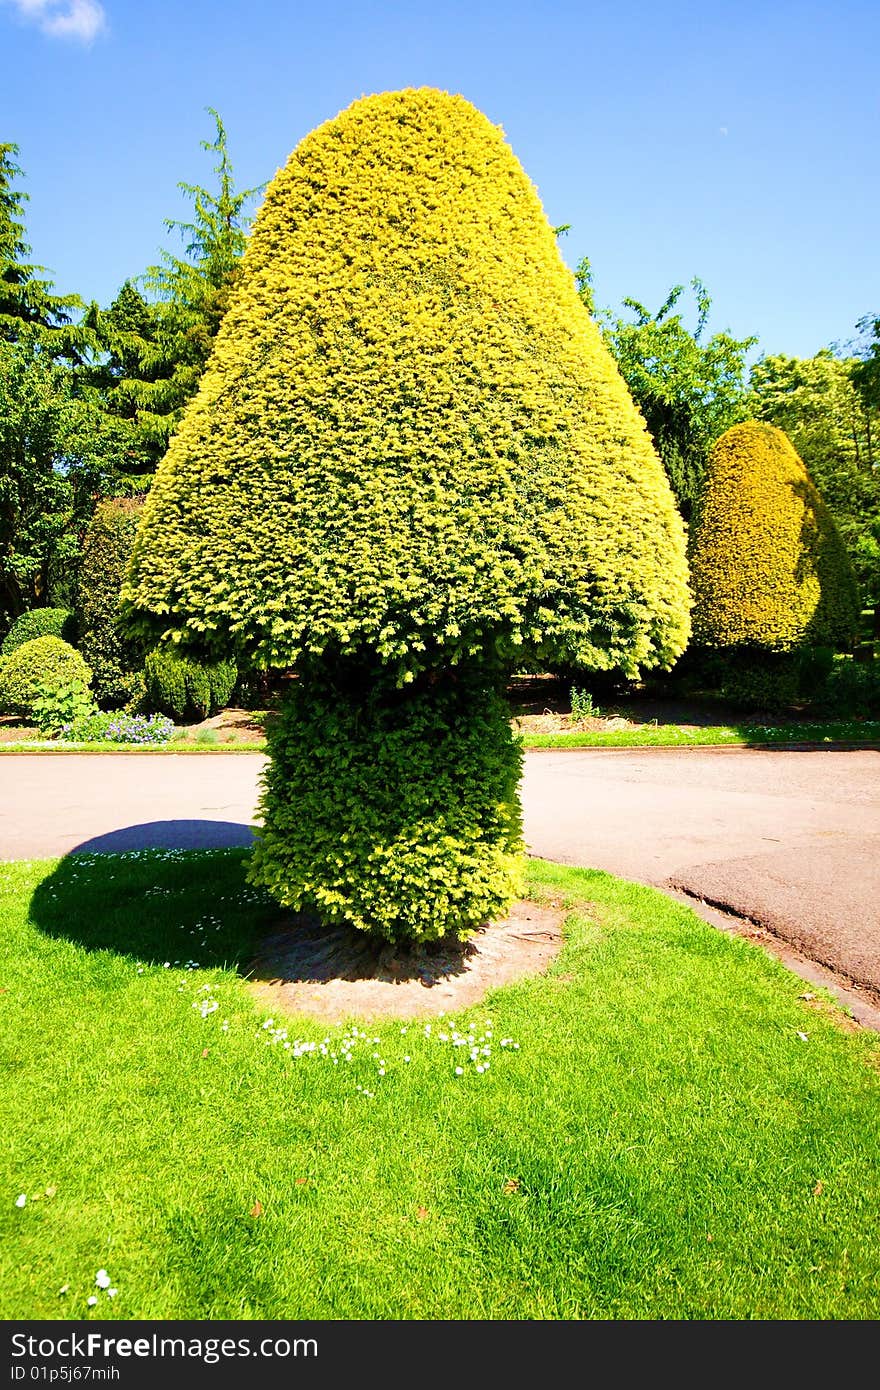 The photograph shows a conifer cut into a mushroom shape. Taken in Queens Park, Longton, England. The photograph shows a conifer cut into a mushroom shape. Taken in Queens Park, Longton, England.